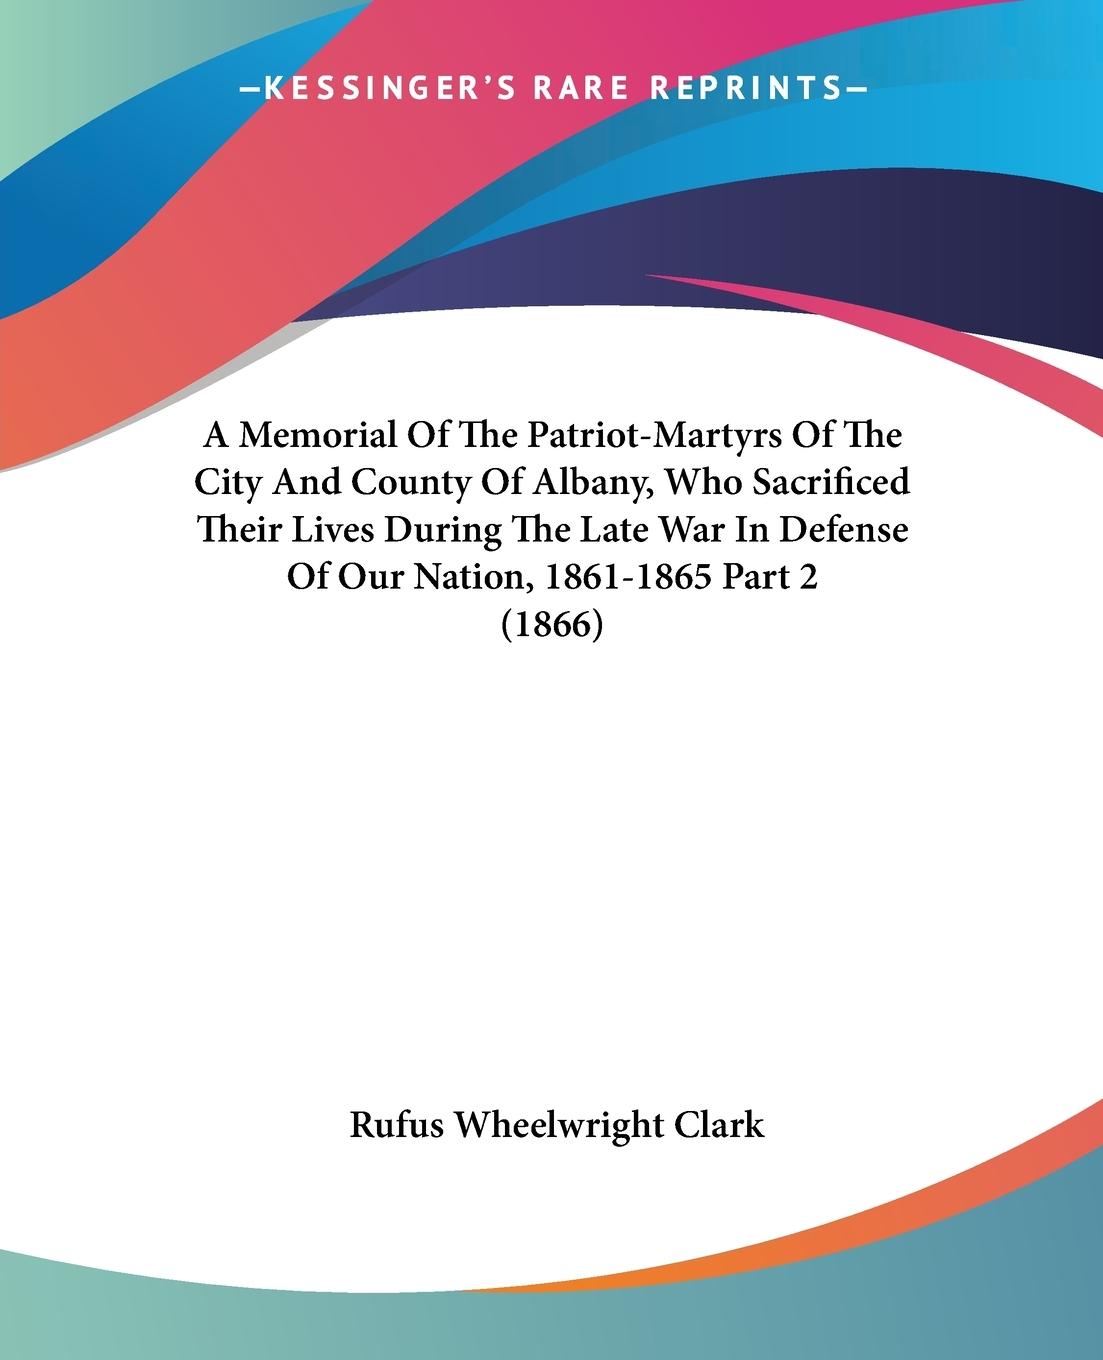 A Memorial Of The Patriot-Martyrs Of The City And County Of Albany, Who Sacrificed Their Lives During The Late War In Defense Of Our Nation, 1861-1865 Part 2 (1866) - Clark, Rufus Wheelwright